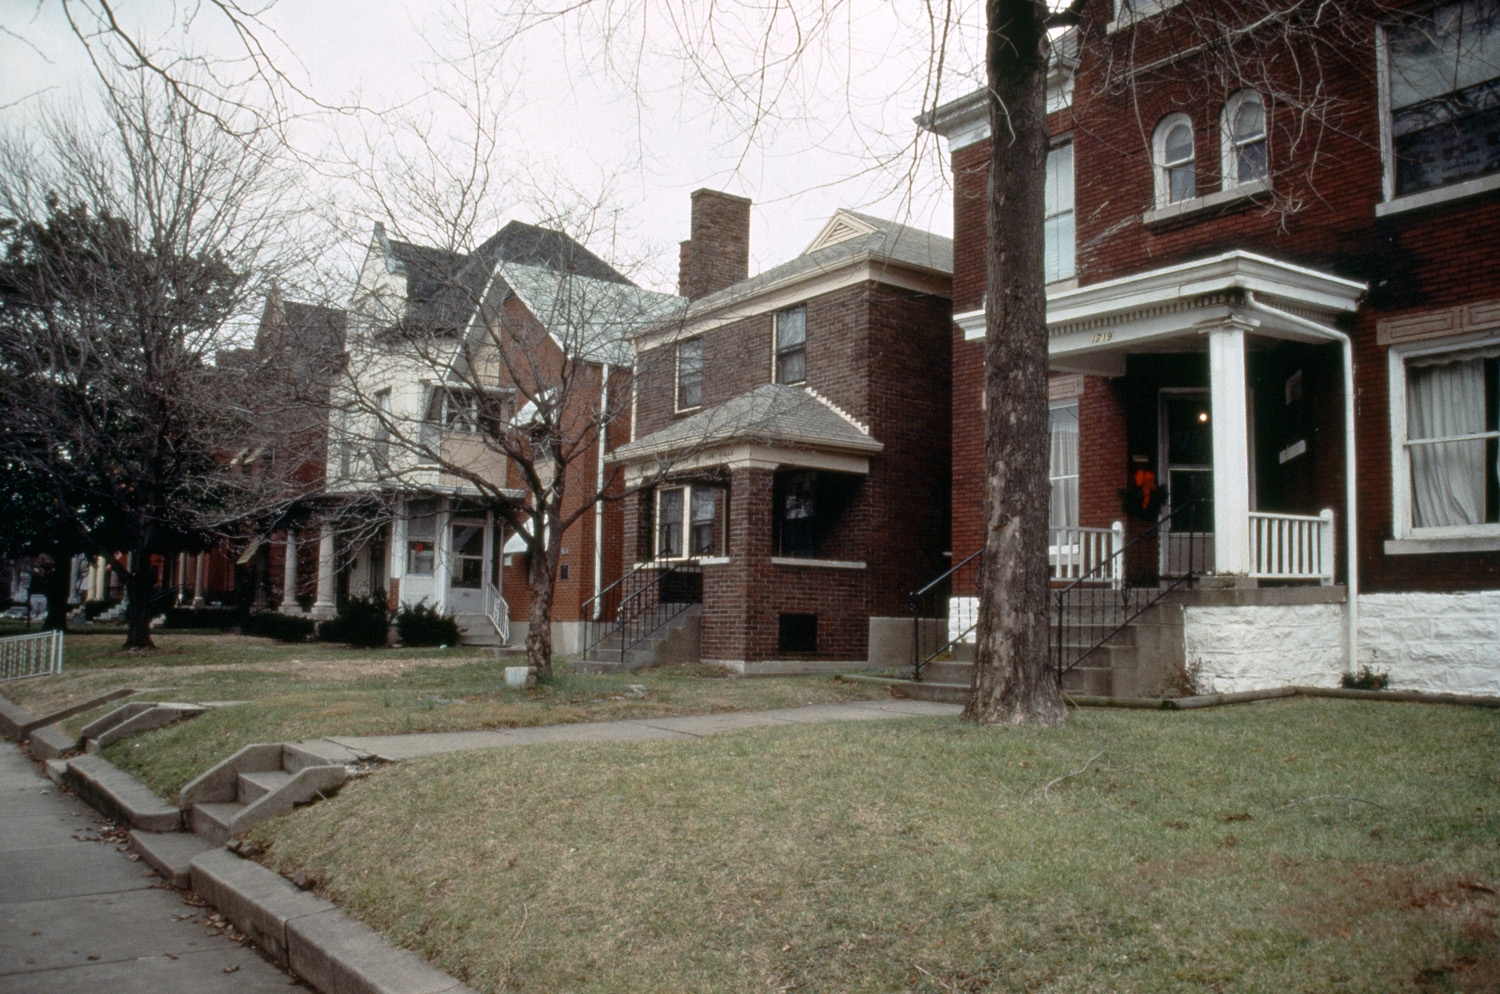 View looking north on 4th Street, with surrounding houses